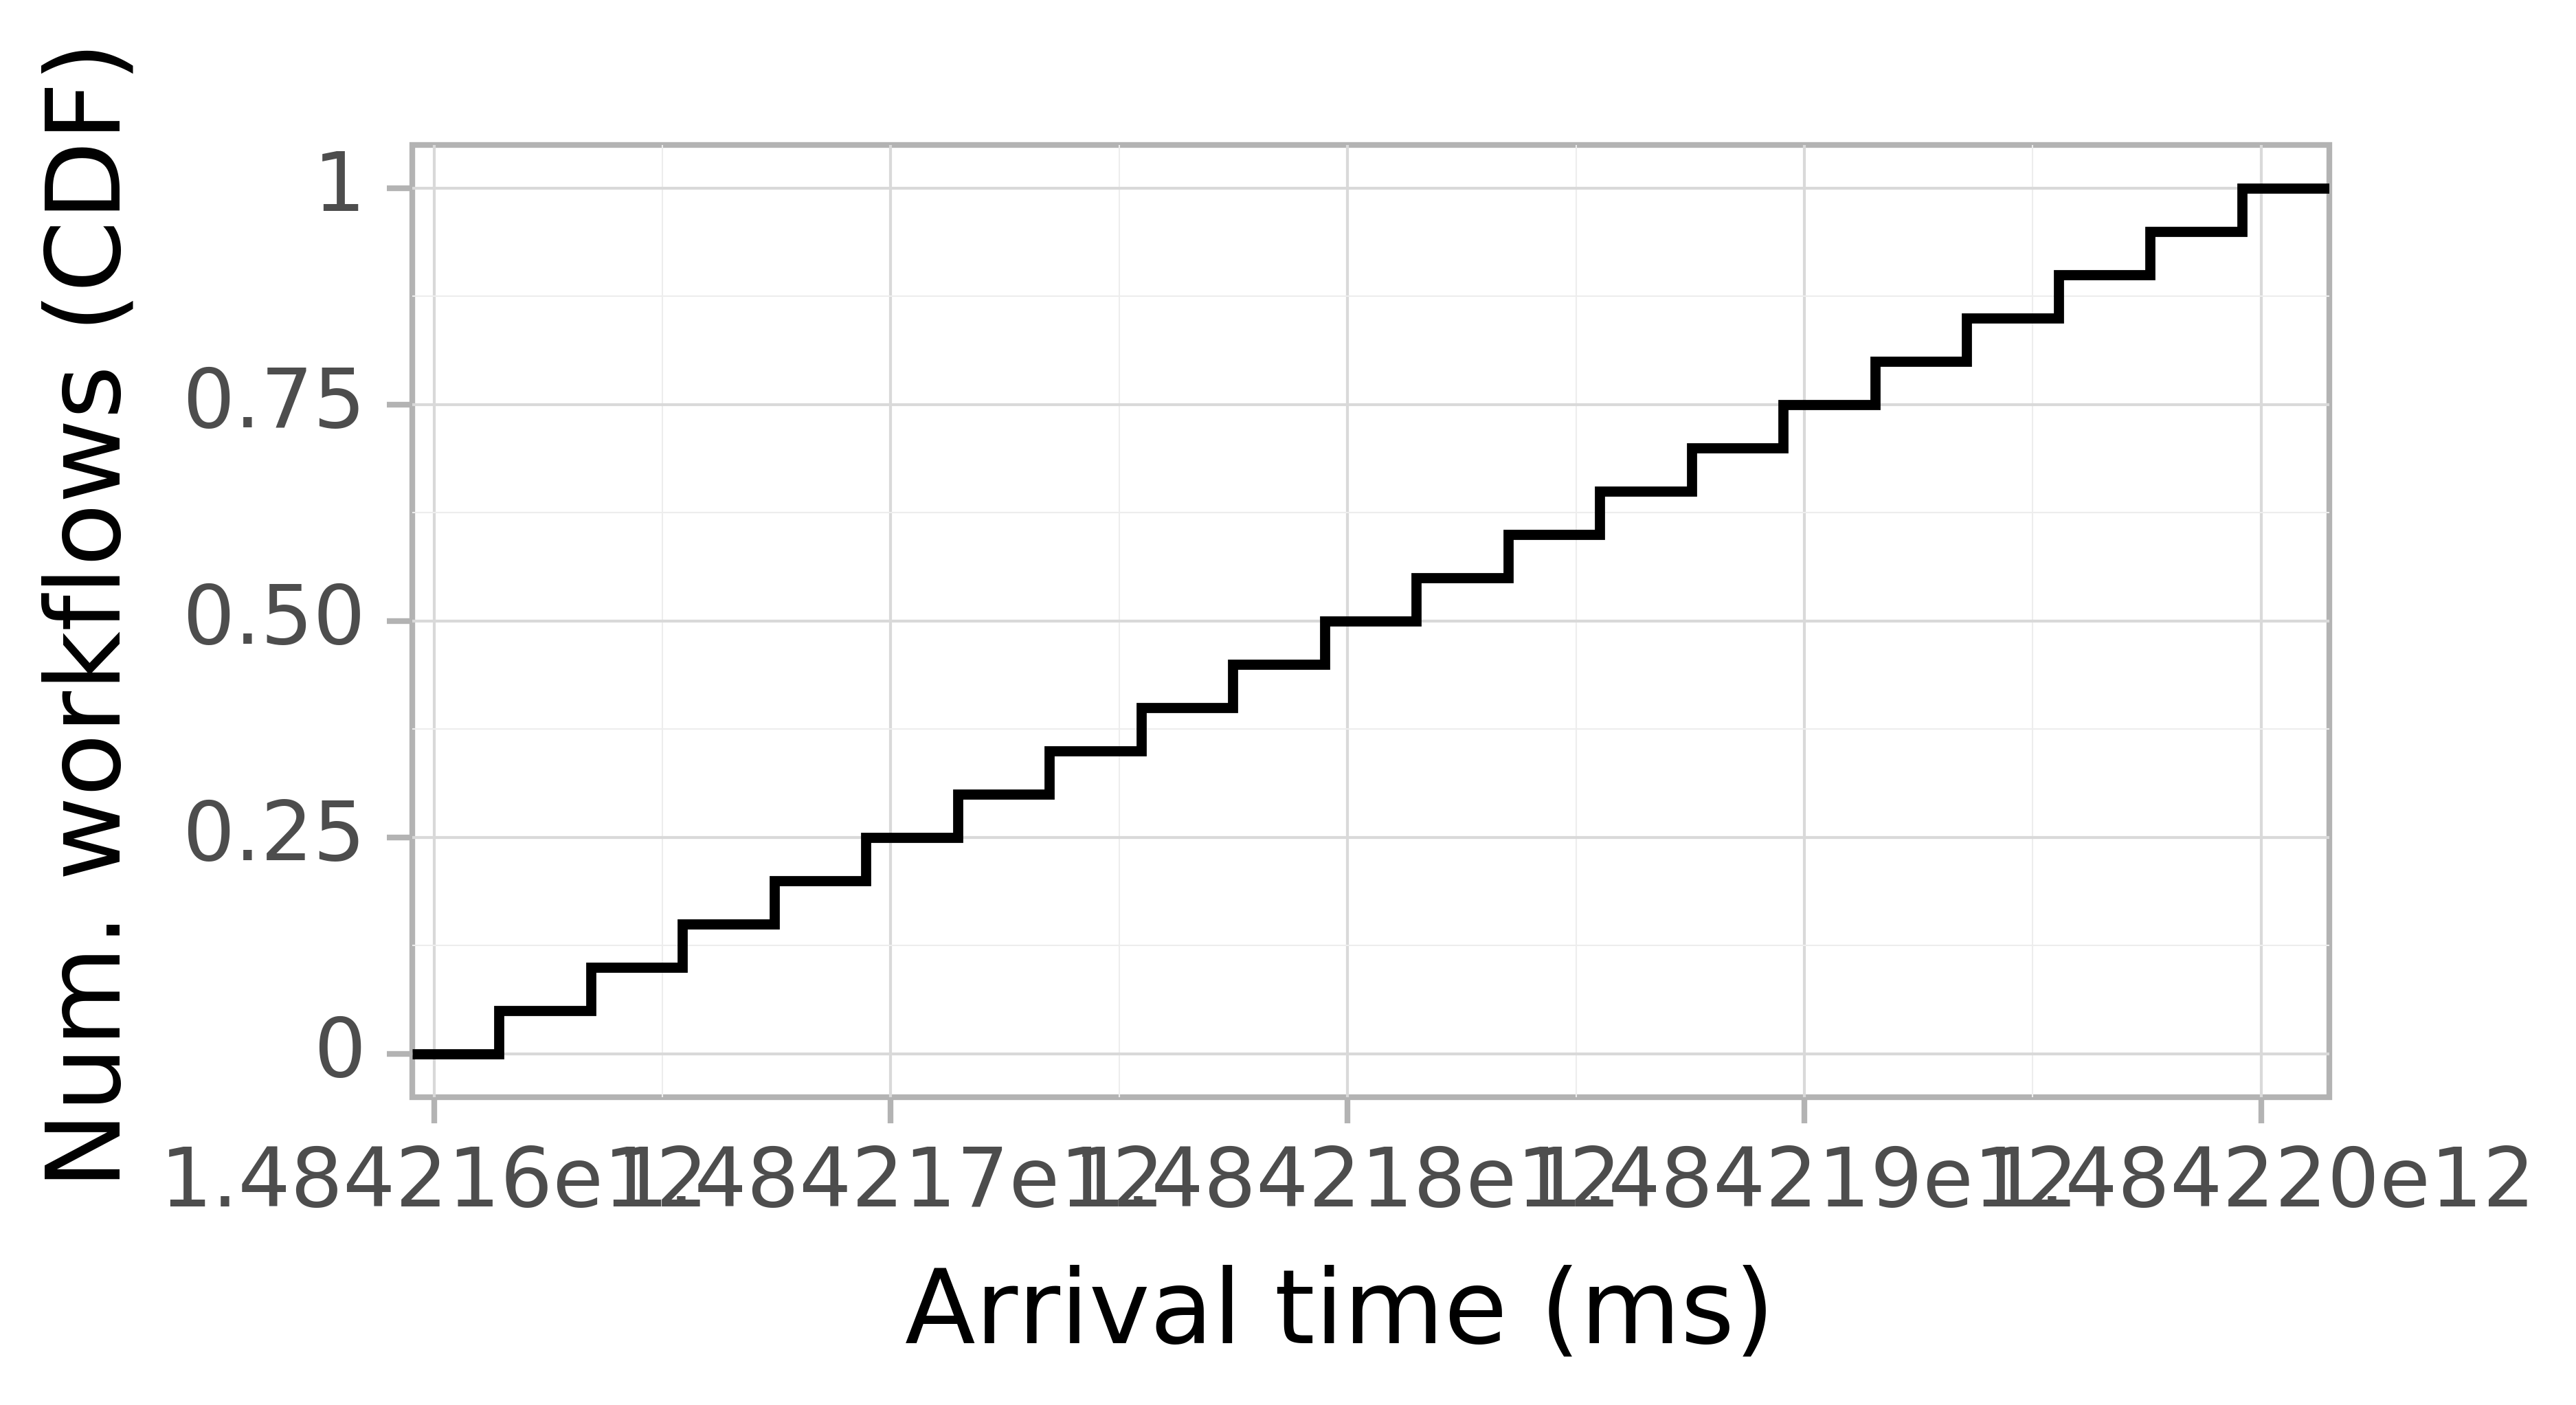 Job arrival CDF graph for the askalon-new_ee10 trace.